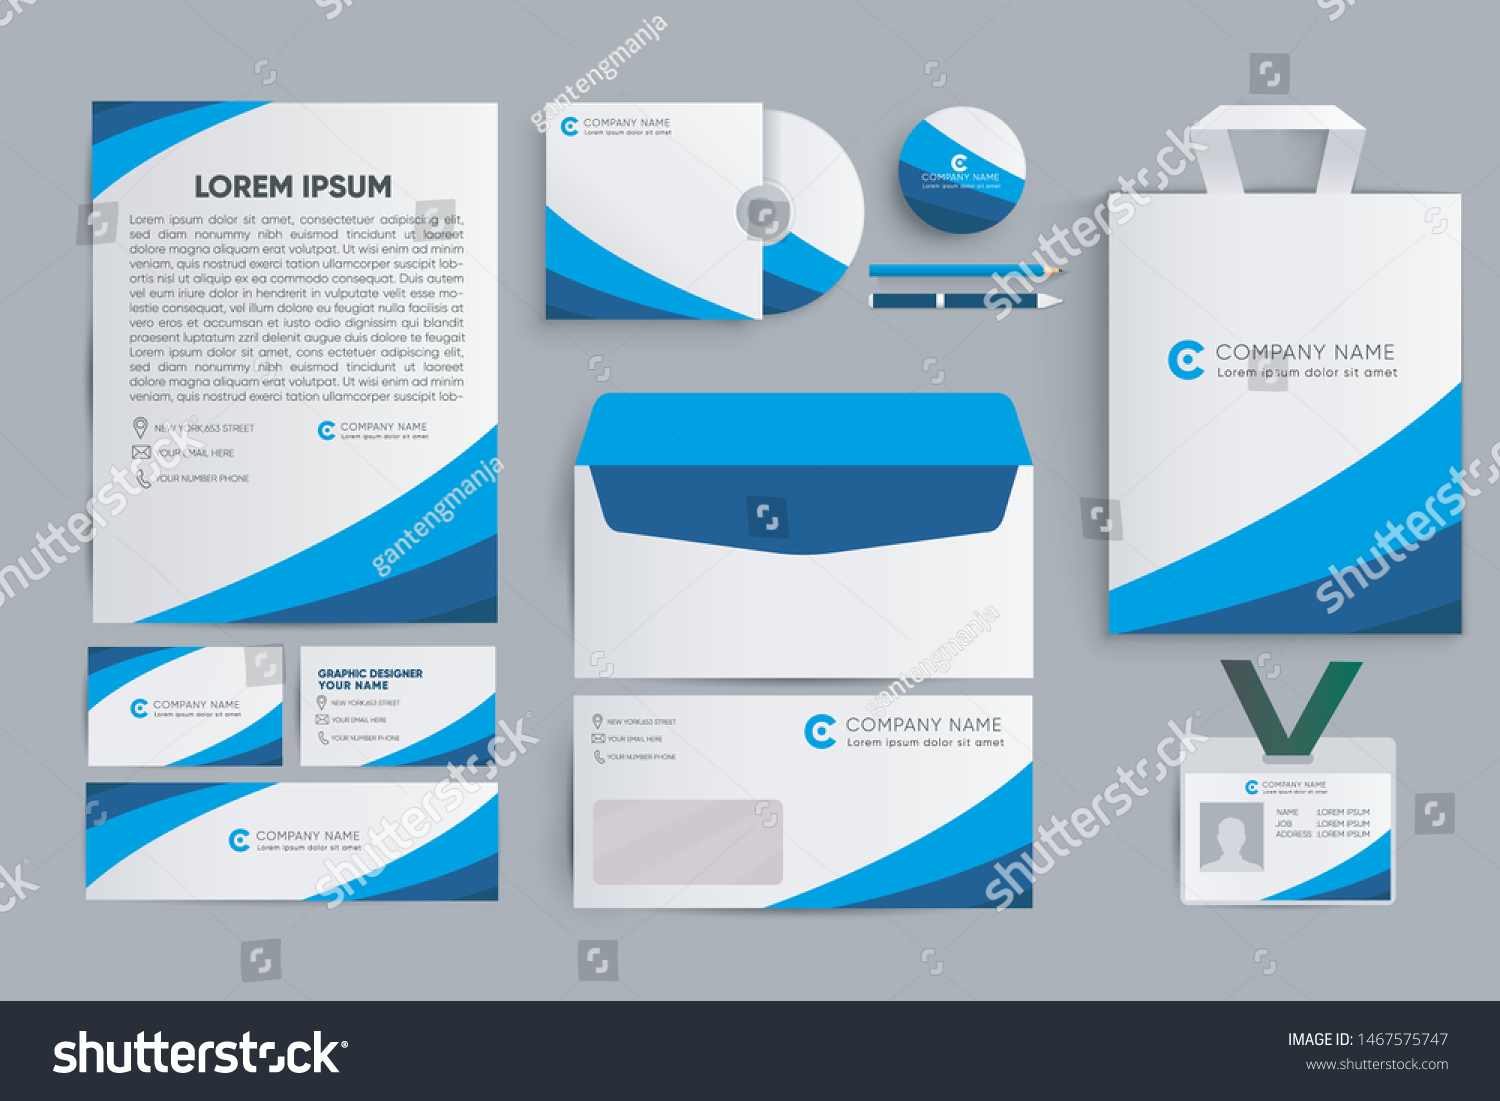 Download Business Stationery Mockup Brandingcorporate Brand Identity Stock Vector Royalty Free 1467575747